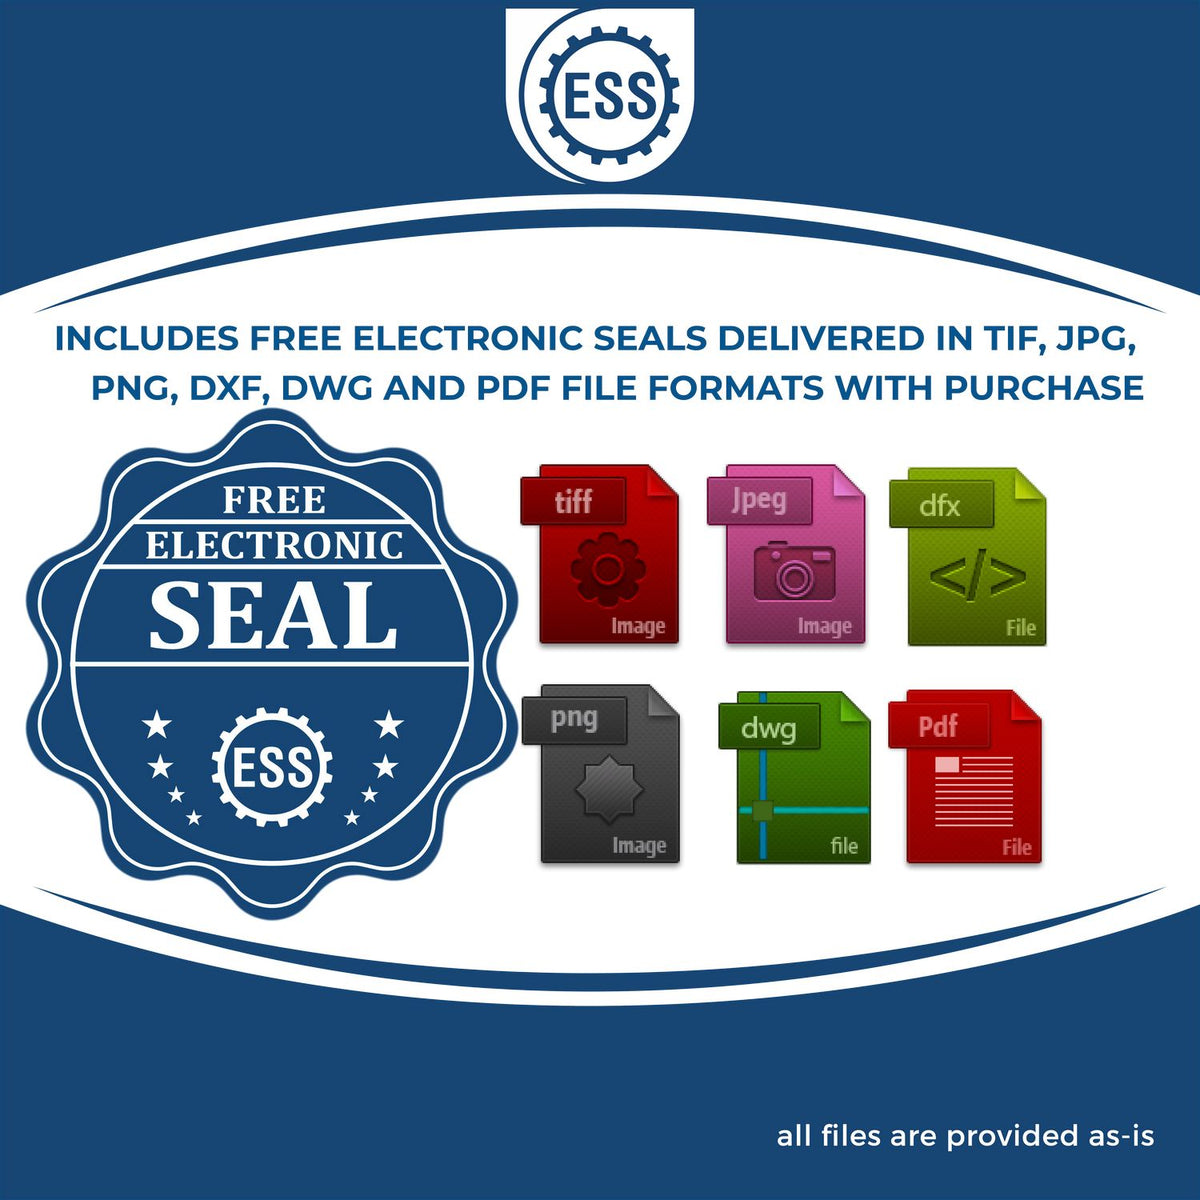 An infographic for the free electronic seal for the Heavy Duty Cast Iron Guam Geologist Seal Embosser illustrating the different file type icons such as DXF, DWG, TIF, JPG and PNG.